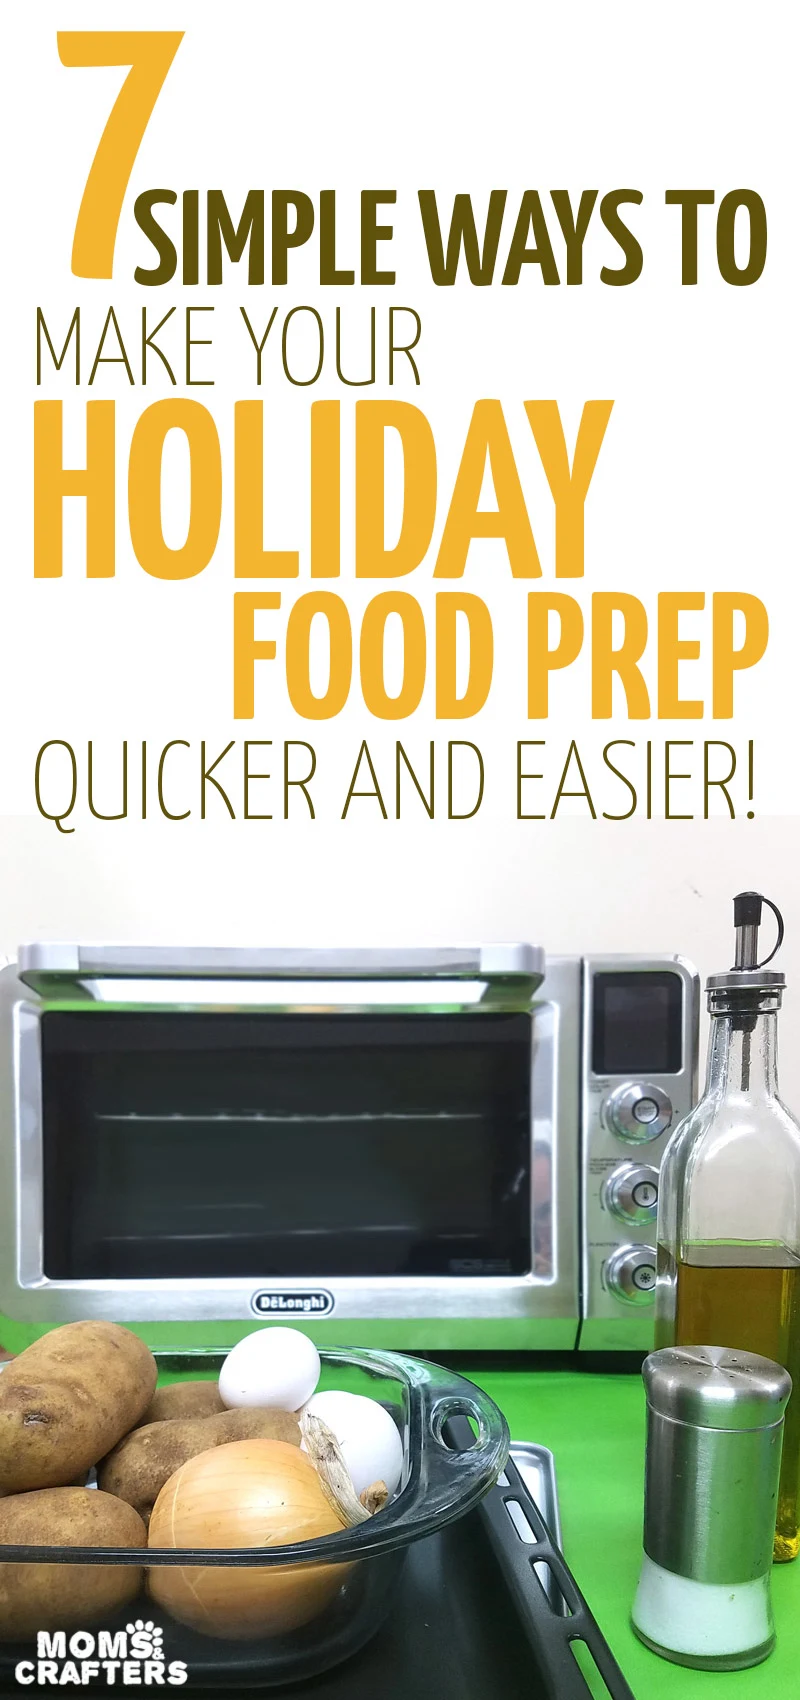 Streamline your holiday prep with these super simple tips - plus a delicious potato kugel recipe! Cook your favorite traditional dishes much easier! #christmas, #holidays #winter #hanukkah #recipe